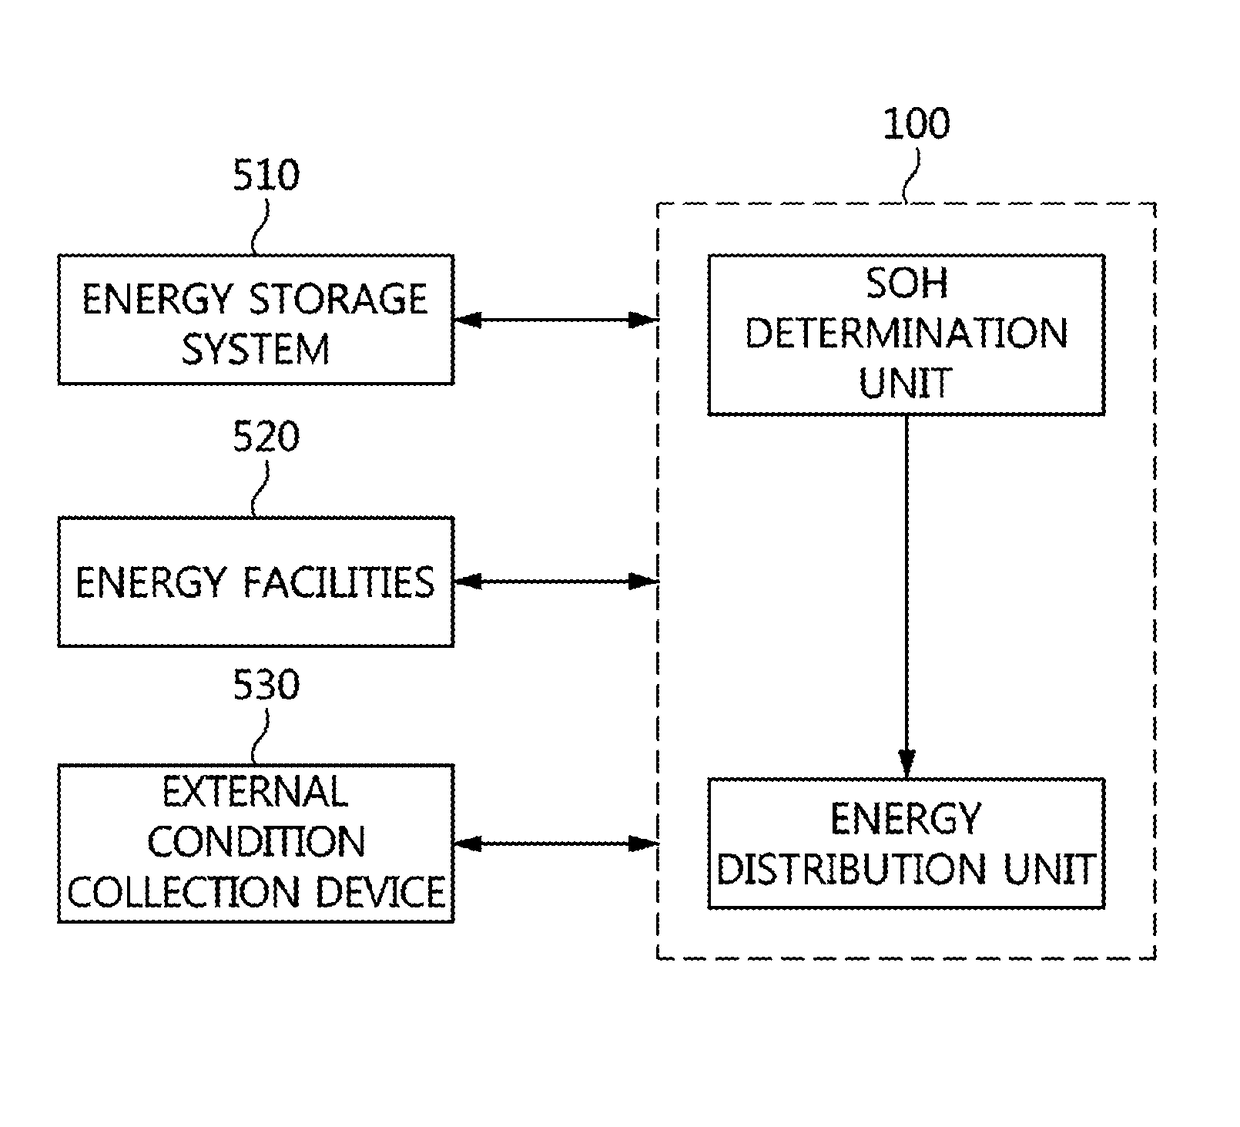 Apparatus and method for managing energy in building based on state of health of energy storage system